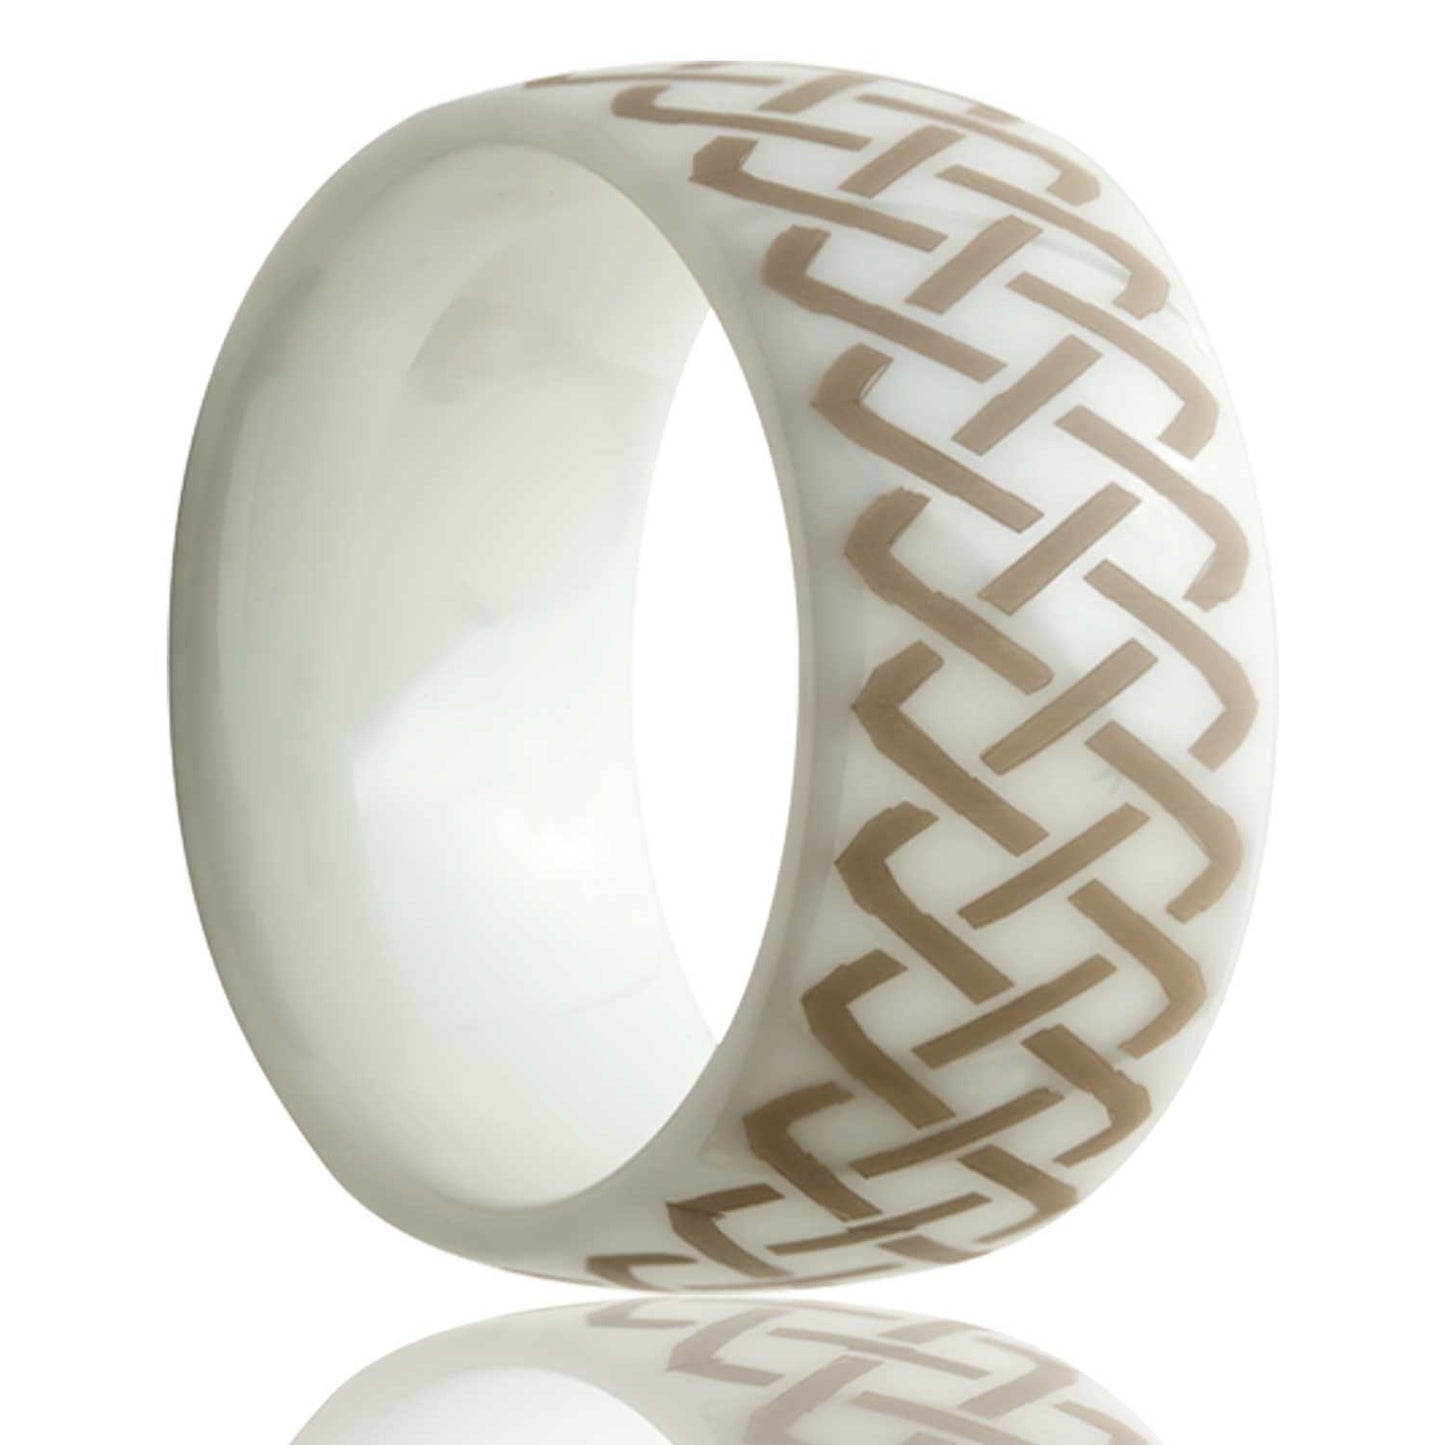 A celtic sailor's knot domed white ceramic men's wedding band displayed on a neutral white background.